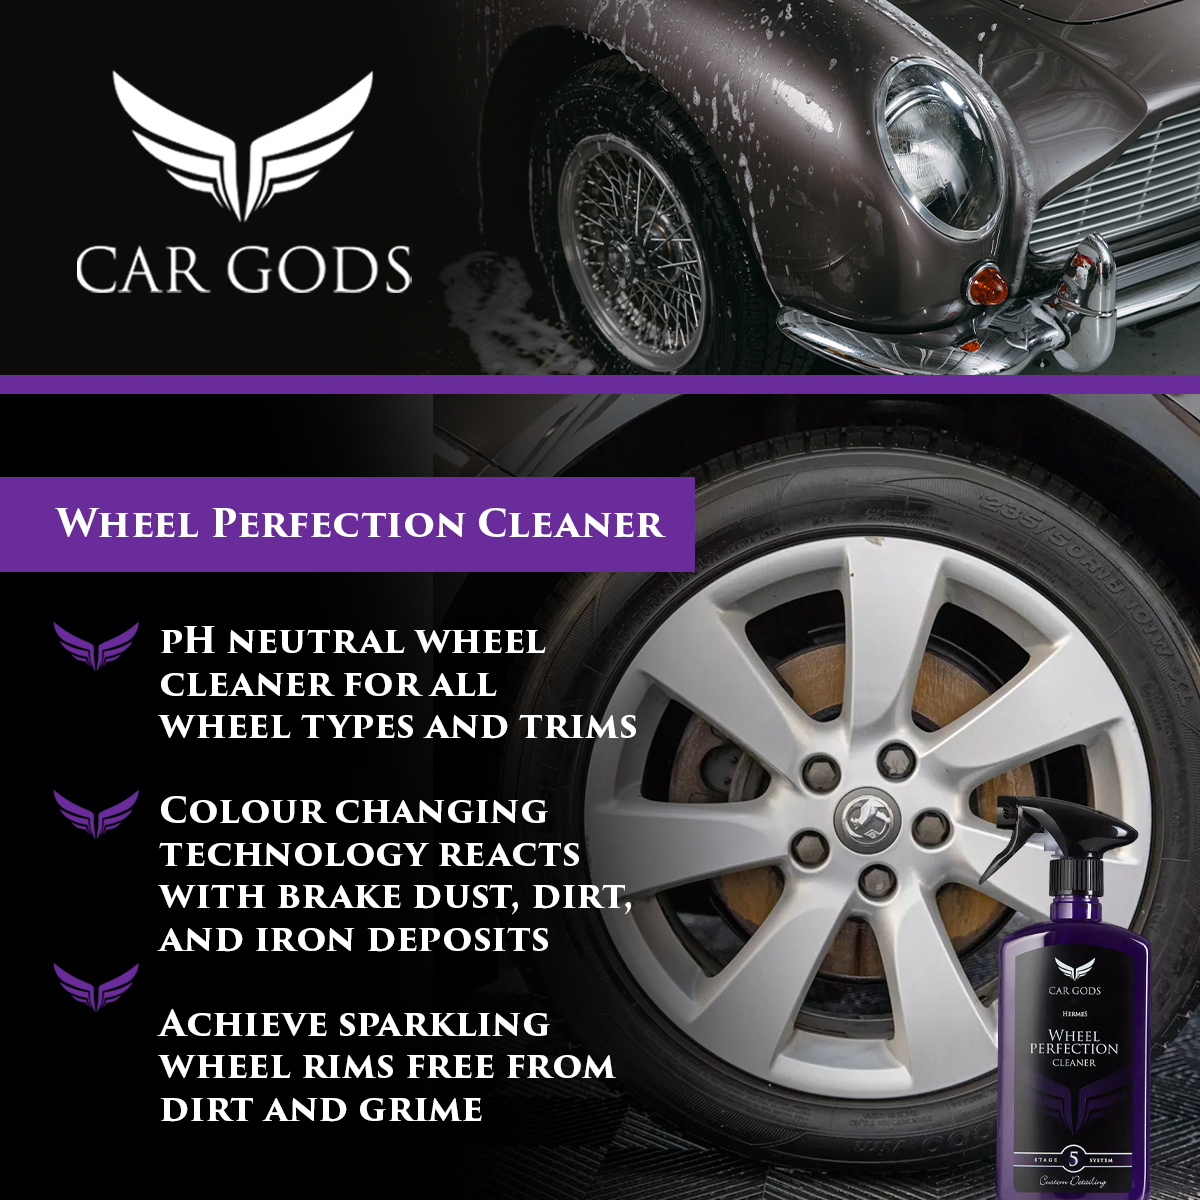 Car Gods Wheel Perfection Cleaner. pH neutral wheel cleaner for wheel types and wheel trims with colour changing technology that reacts with brake dust, dirt, and iron deposits to dissolve contaminants for a superior clean.